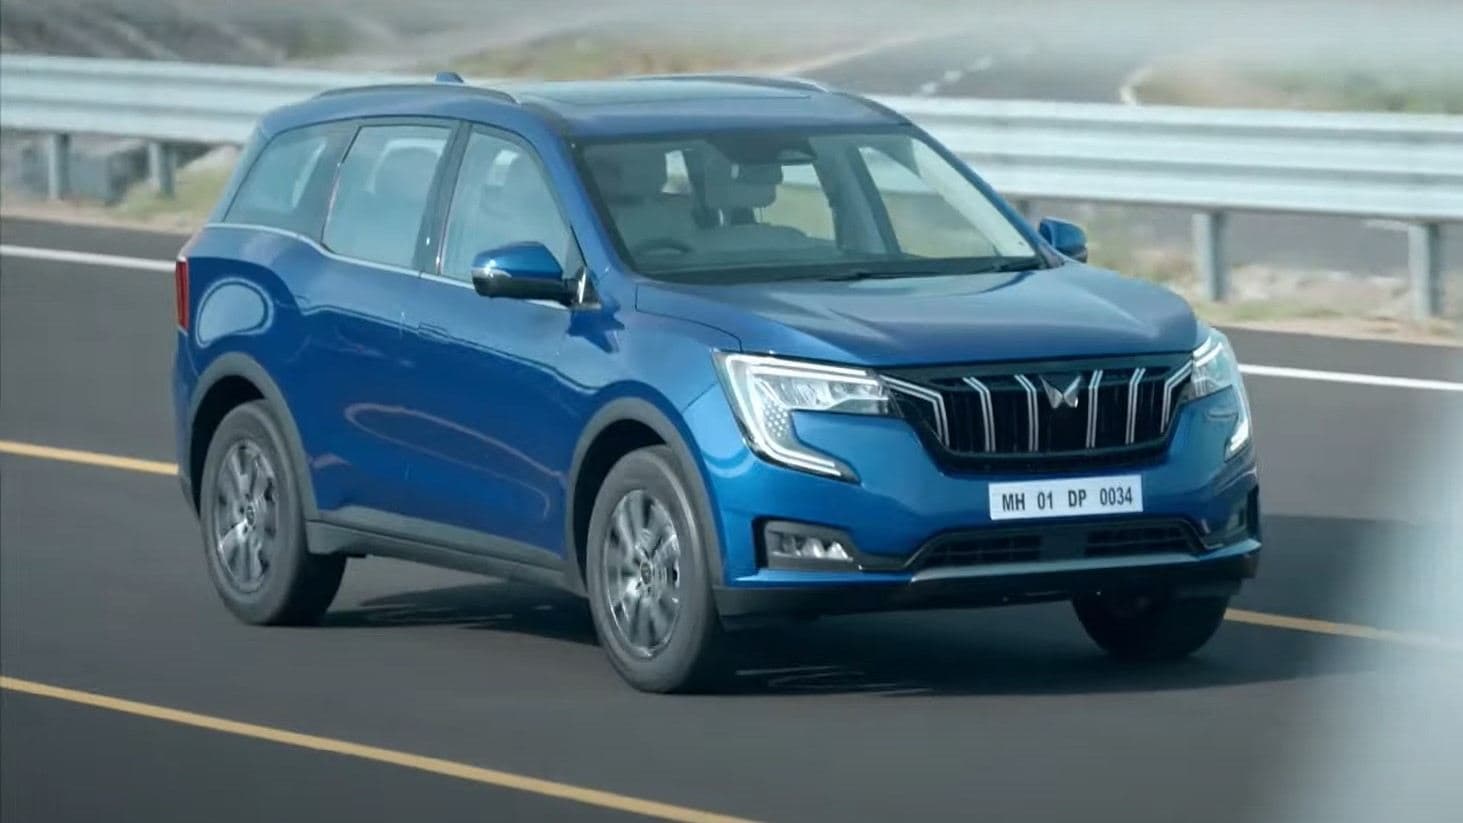 The Mahindra XUV700 will be offered with 2.0-litre petrol and 2.2-litre diesel engines. Image: Mahindra